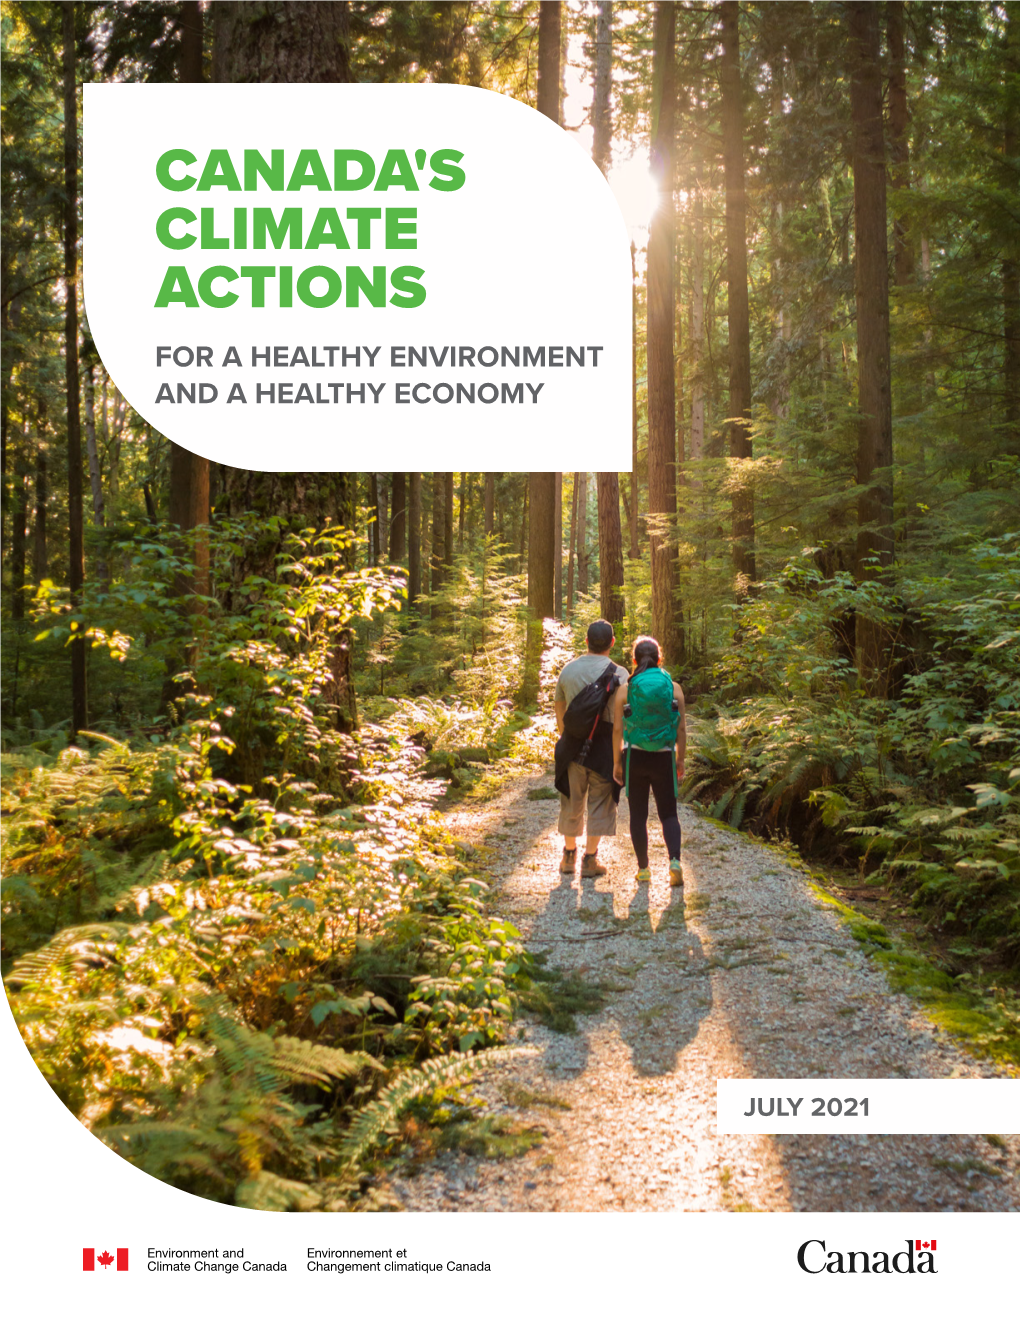 Canada's Climate Actions for a Healthy Environment and a Healthy Economy